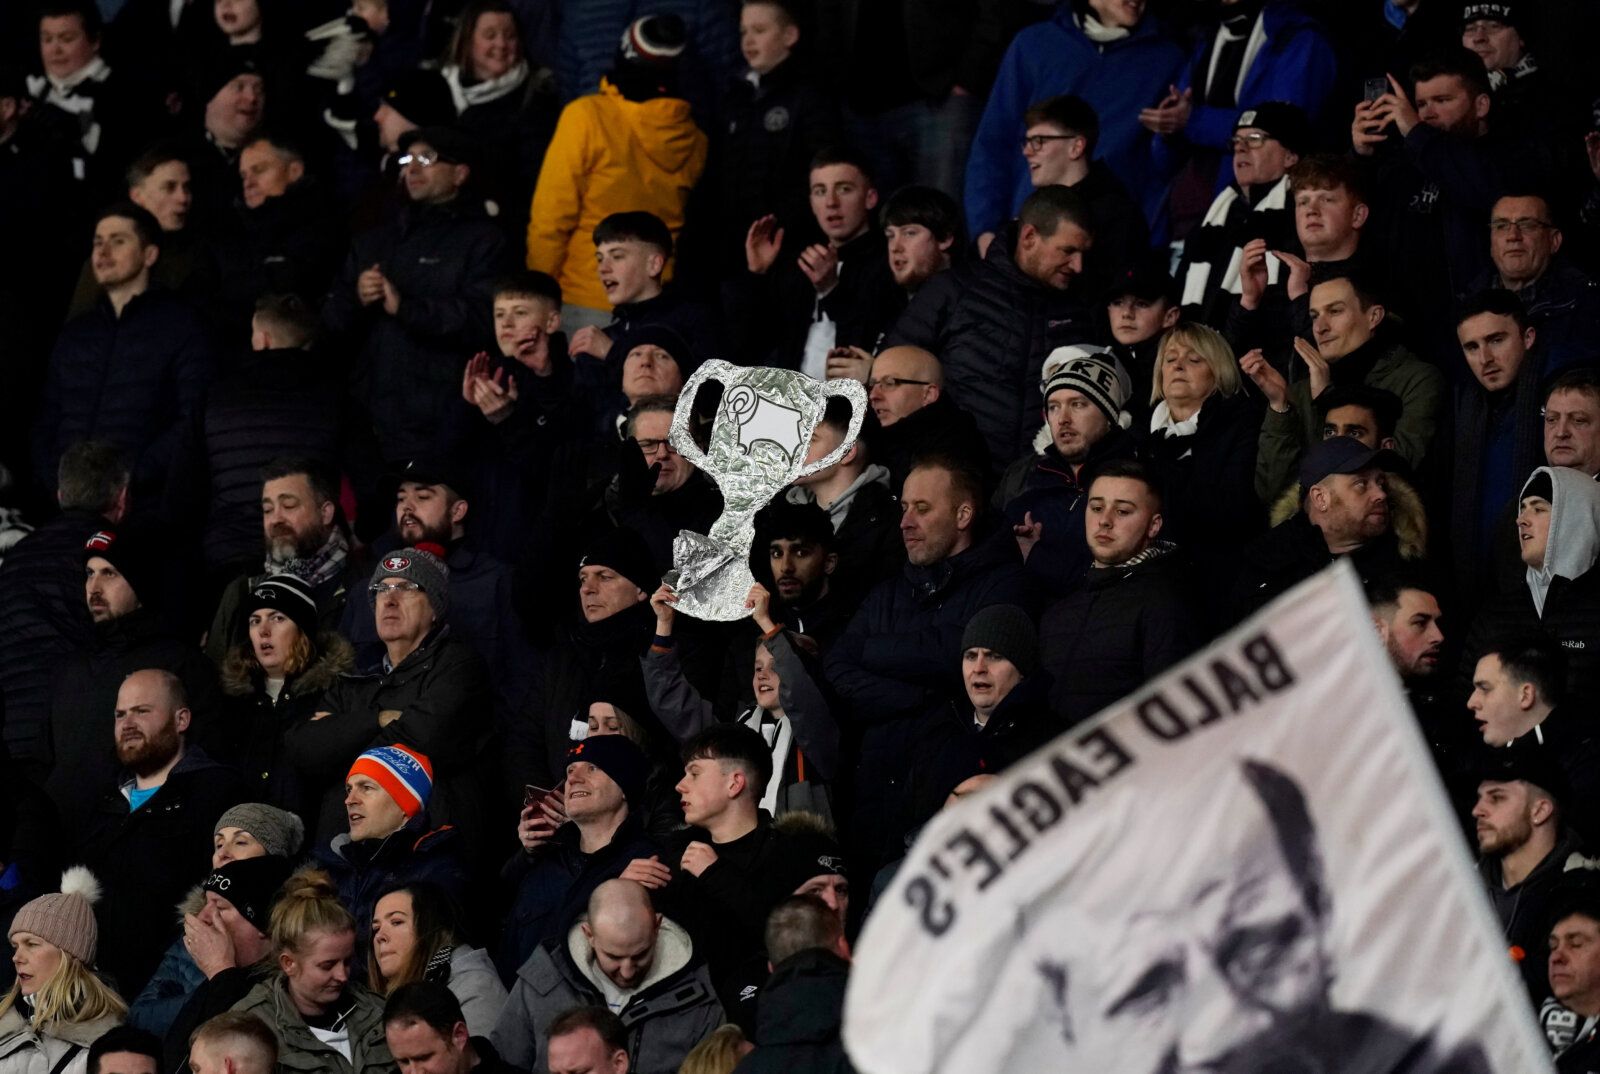 Soccer Football - FA Cup Fifth Round - Derby County v Manchester United - Pride Park, Derby, Britain - March 5, 2020   Derby County fans during the match    REUTERS/Andrew Yates